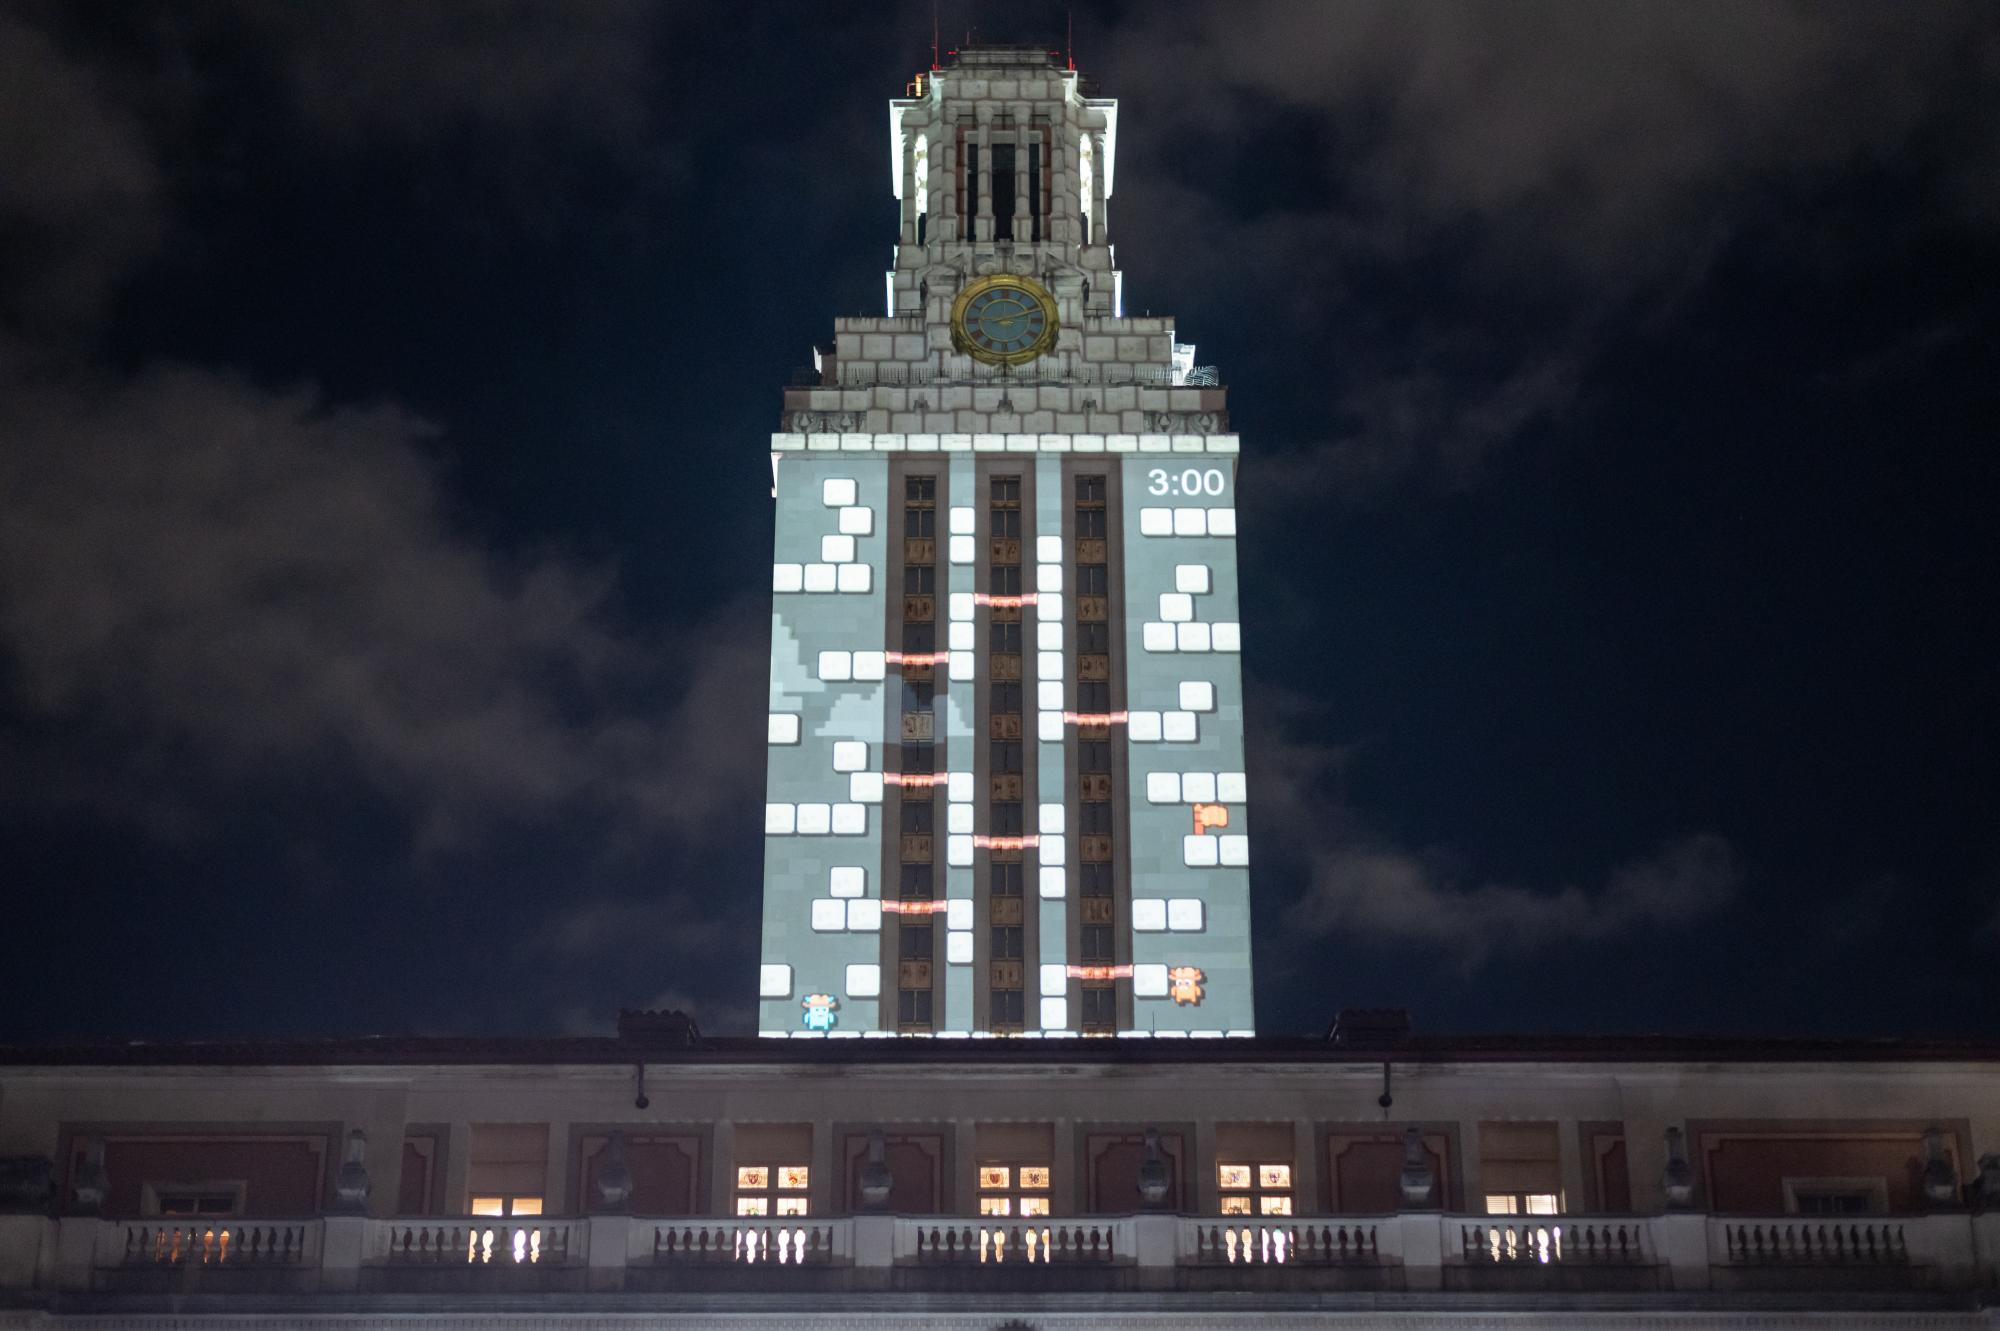 The UT Tower features the video game Tower Tumble